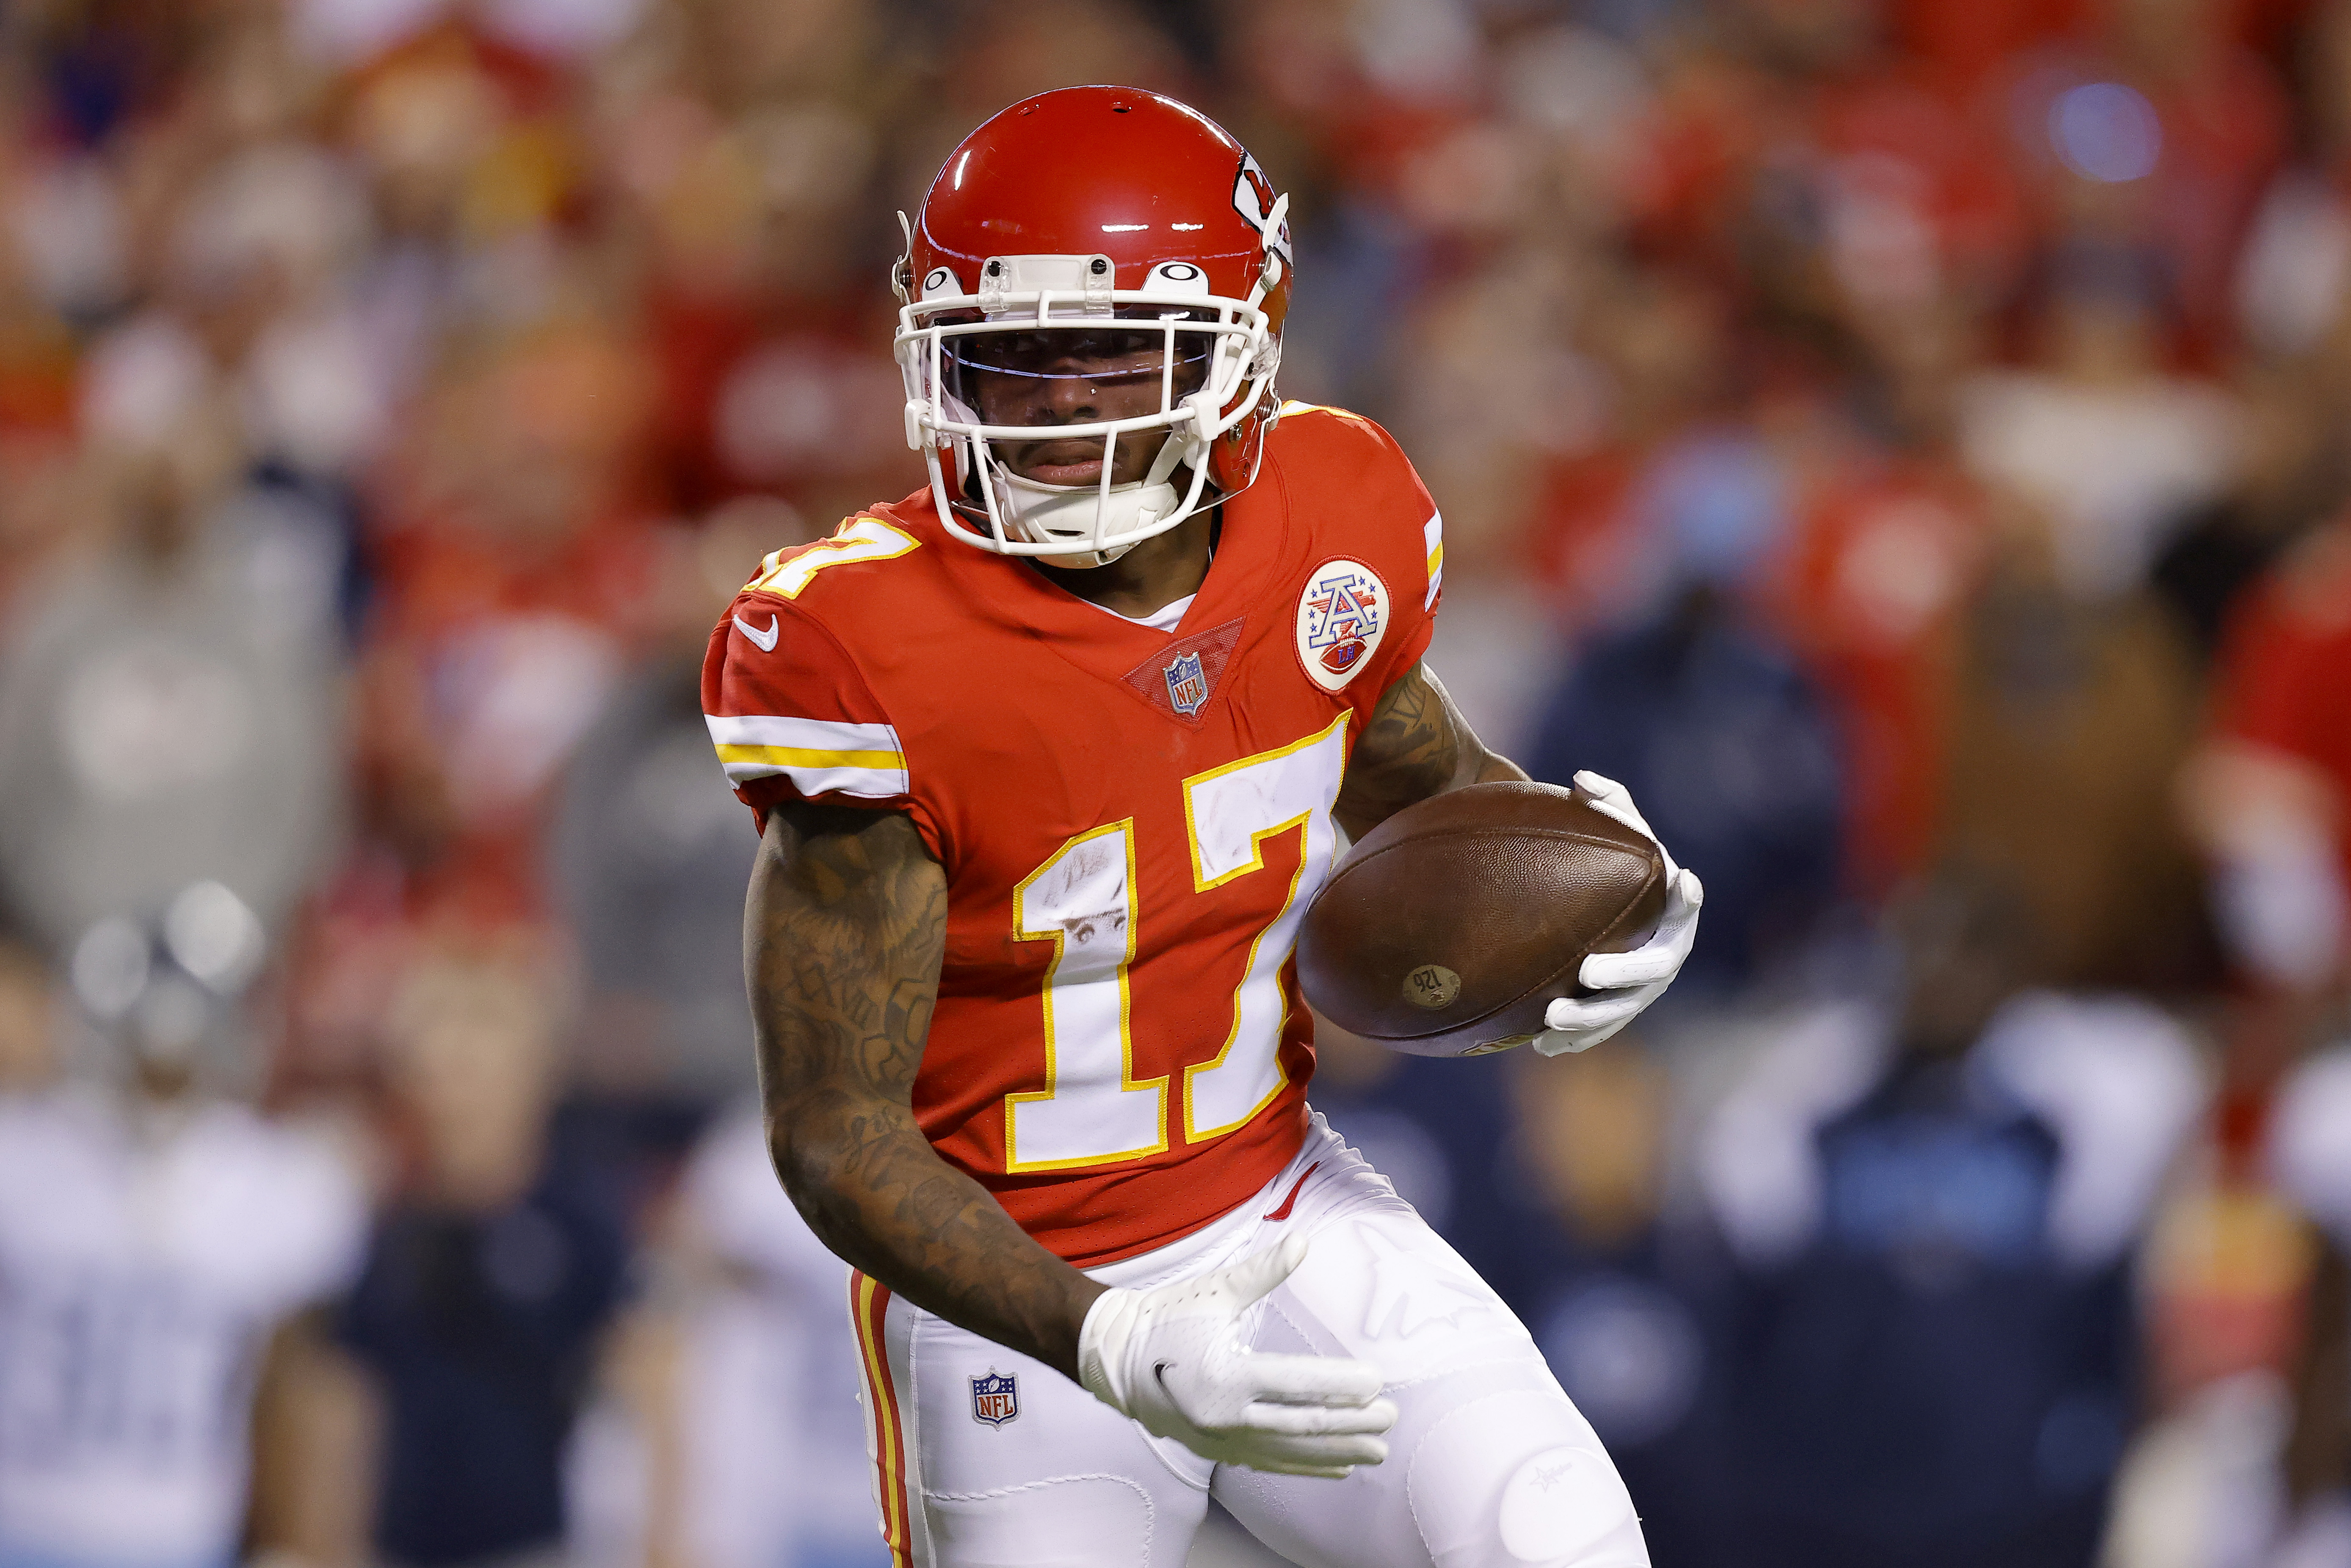 Mecole Hardman #17 of the Kansas City Chiefs runs with the ball against the Tennessee Titans in the first half at Arrowhead Stadium on November 06, 2022 in Kansas City, Missouri.